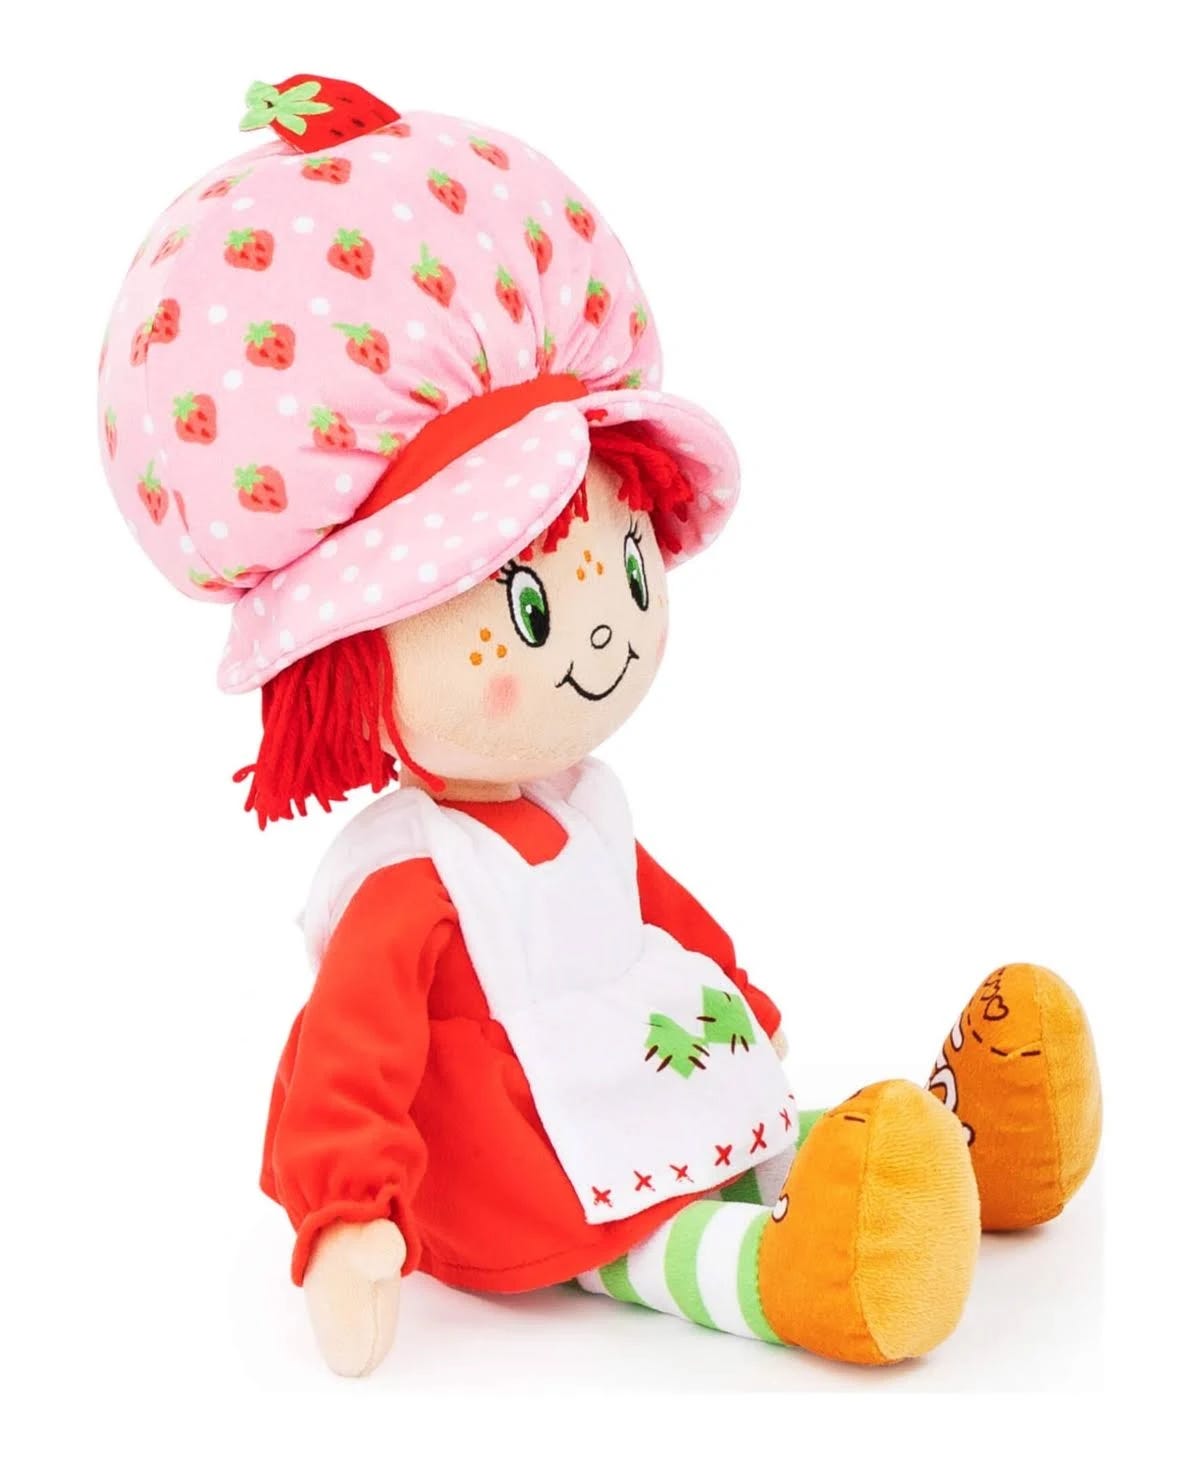 Soft and Cuddly Strawberry Shortcake Pillow Pal | Image